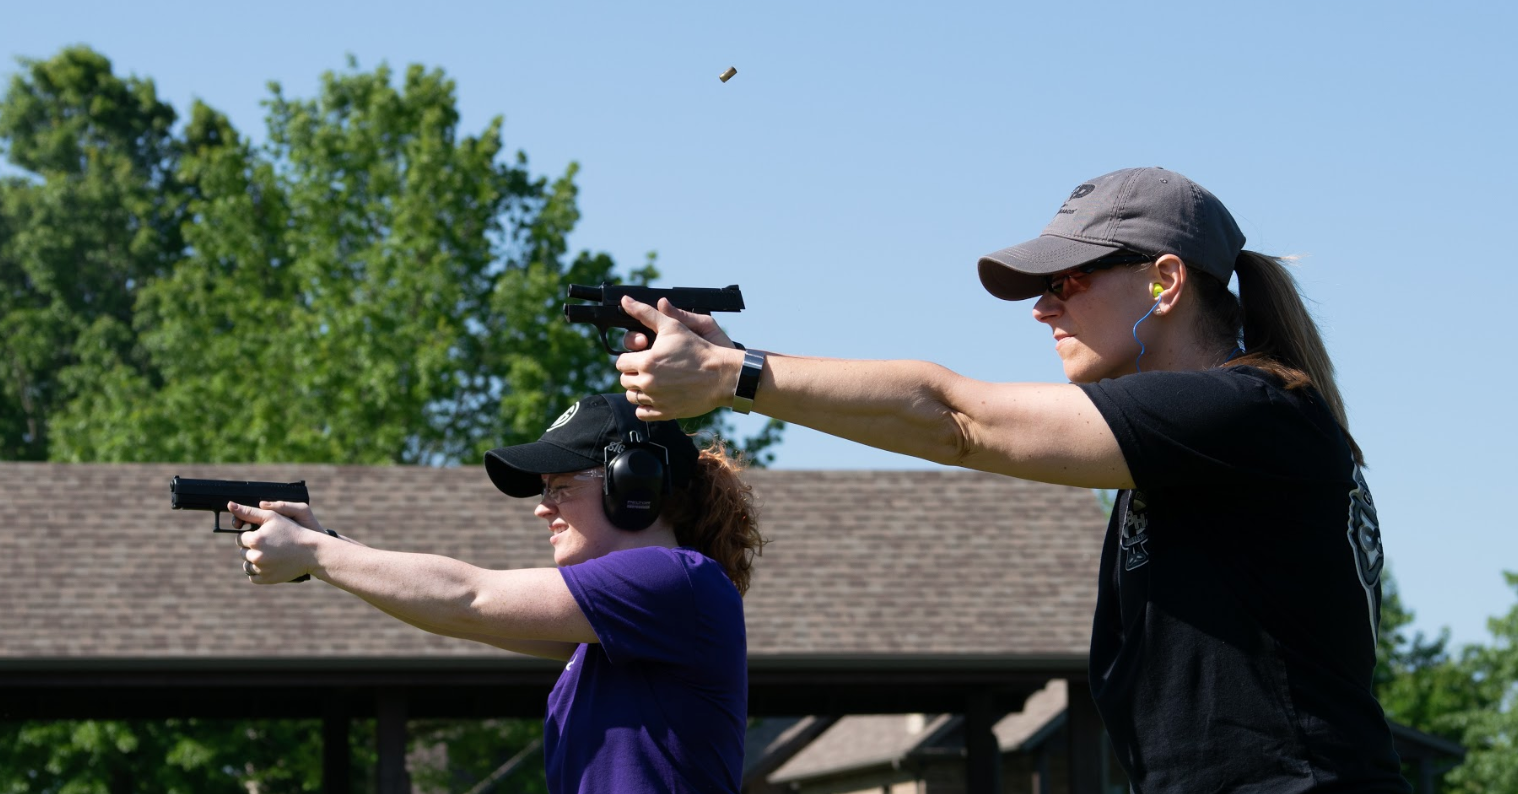 women, female, concealed carry women, female gun owners, female shooters, CCP, women who concealed carry, Walther, Jenn Jacques, PK380, self-defense, women, concealed carry, hybrid holsters, guns, gun rights, EDC, best holster, OWB, CrossBreed Holsters, Glock, SIG, Smith & Wesson, Shield, P365, Brownells, personal protection, everyday carry, best holster for women, holster for women, holsters, made in america, women who carry, pistols, handguns, girl's guide to, Mark Craighead, CrossBreed Holsters, best holster, SuperTuck, MiniTuck, gun belt, firearms training, CCW